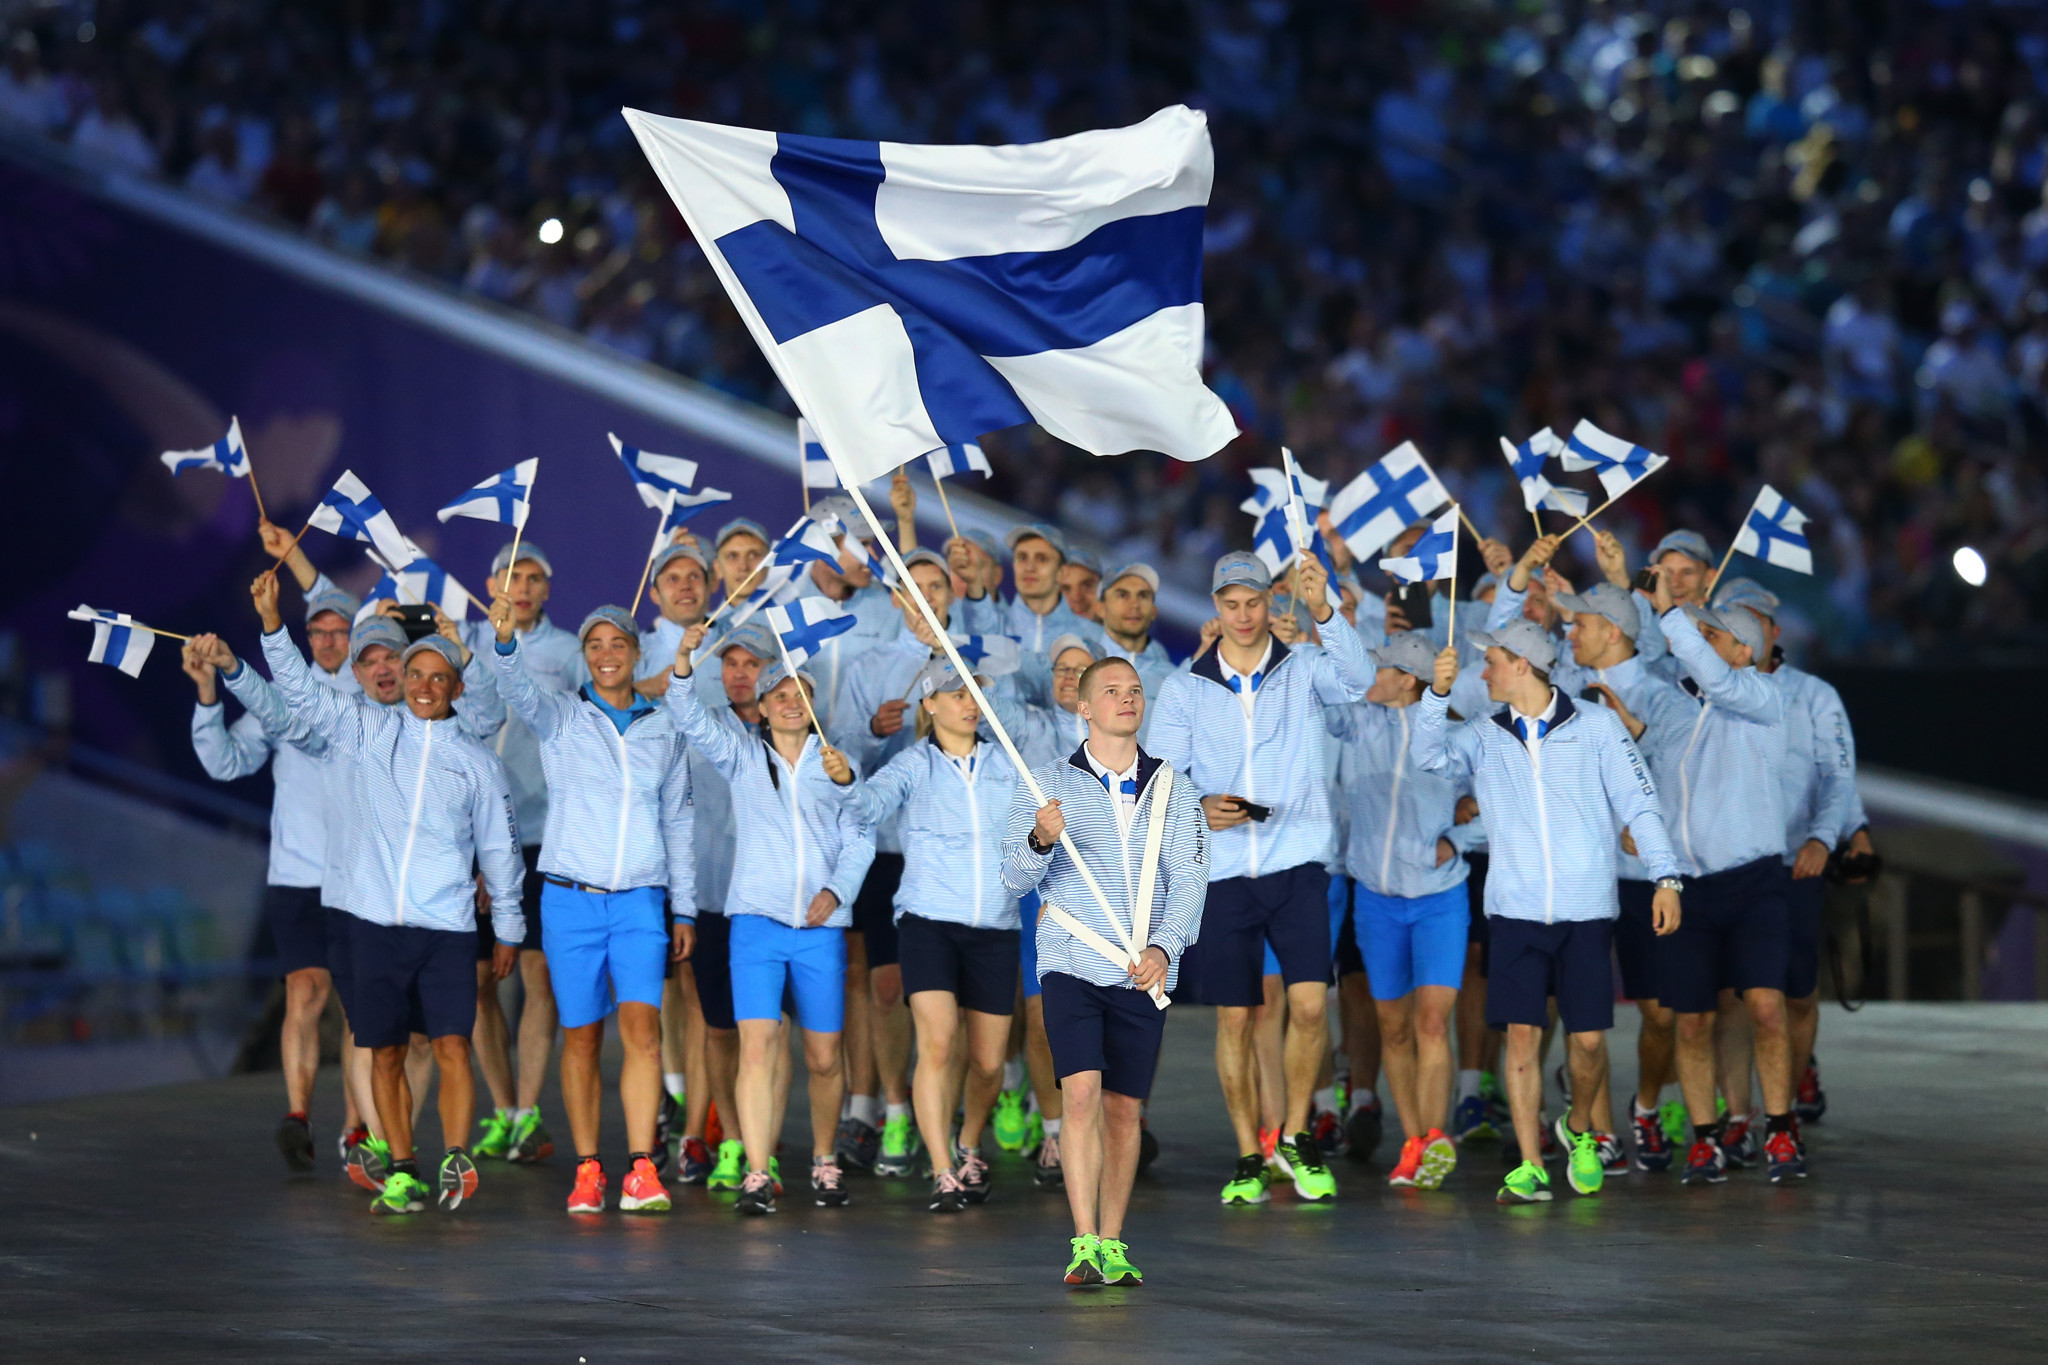 The goal is to help sports clubs across Finland ©Getty Images